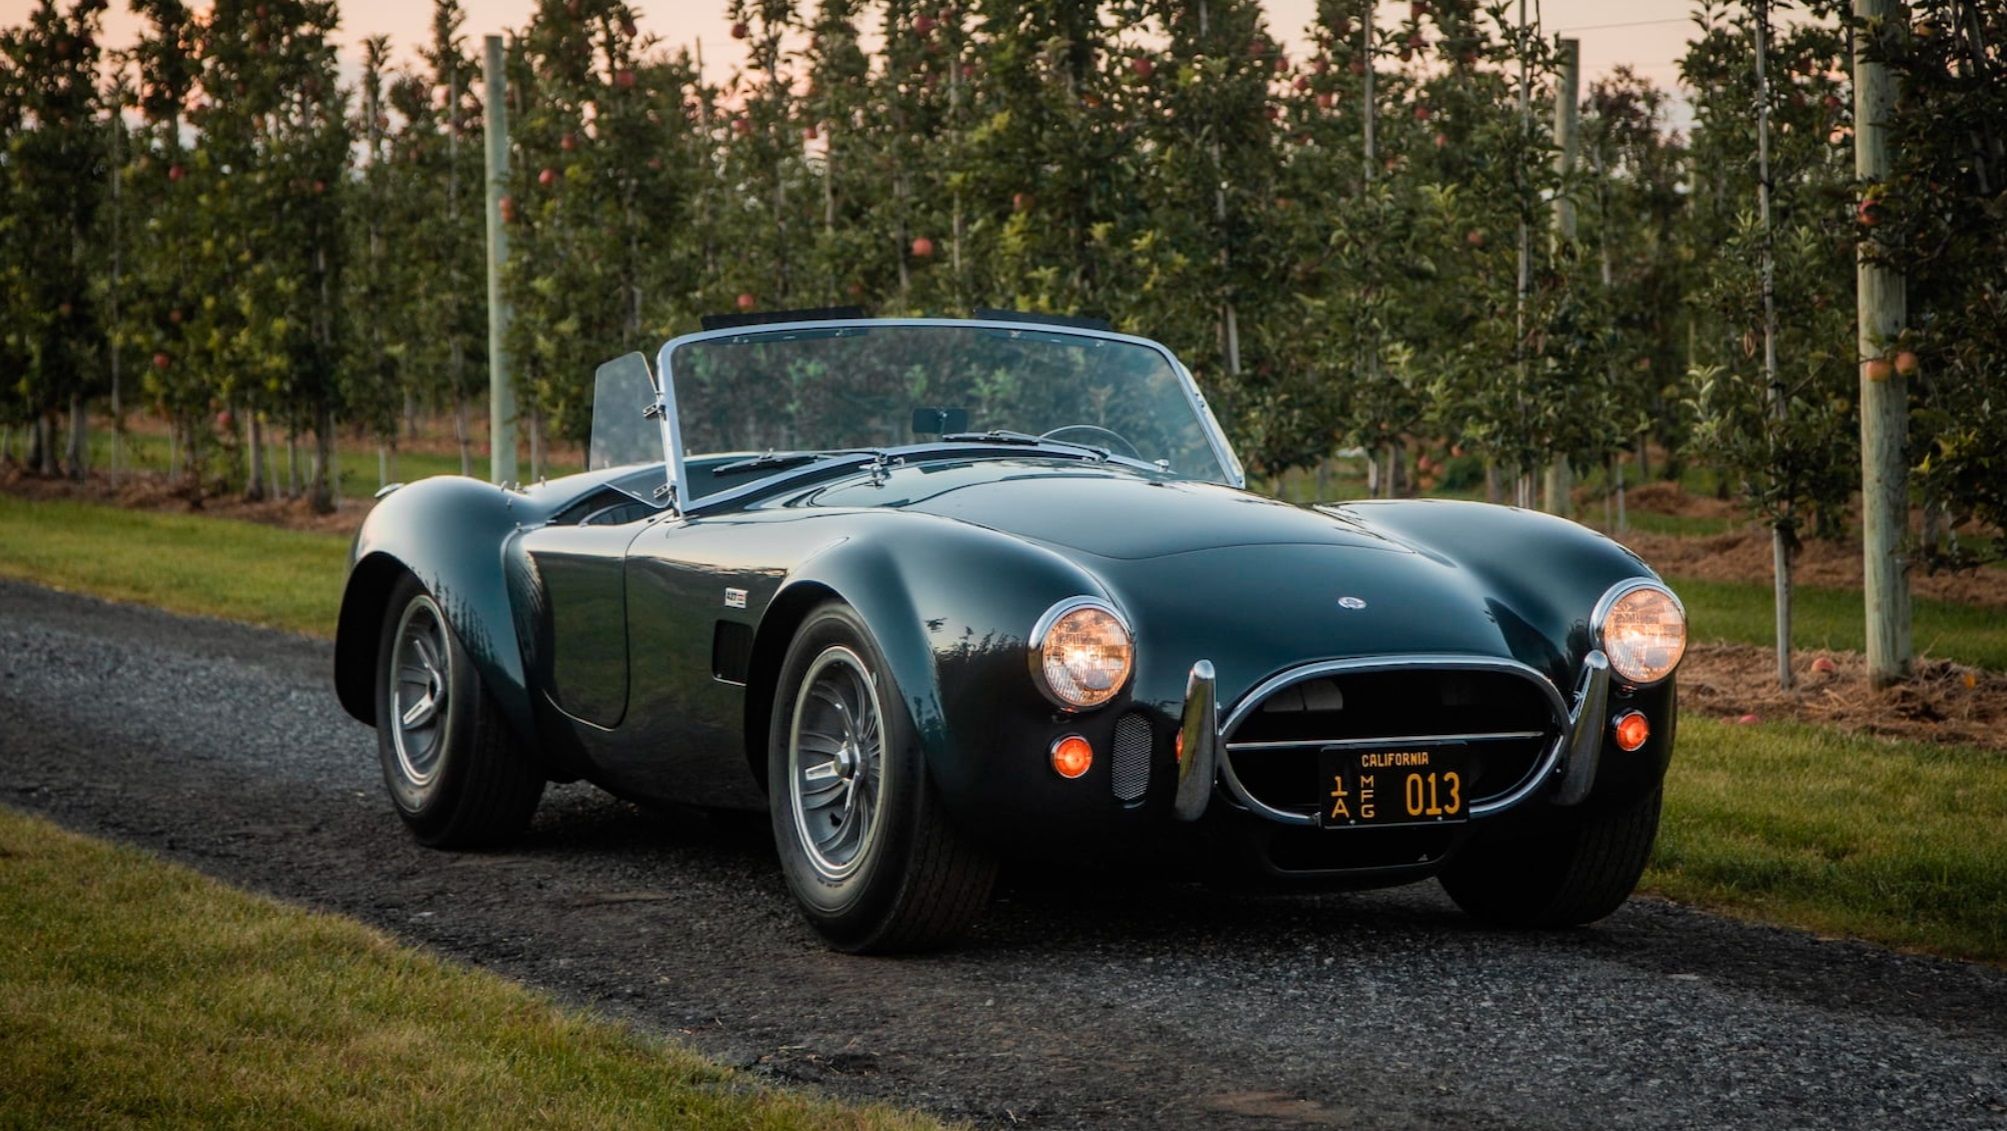 The 1965 Shelby Cobra 427 Roadster.